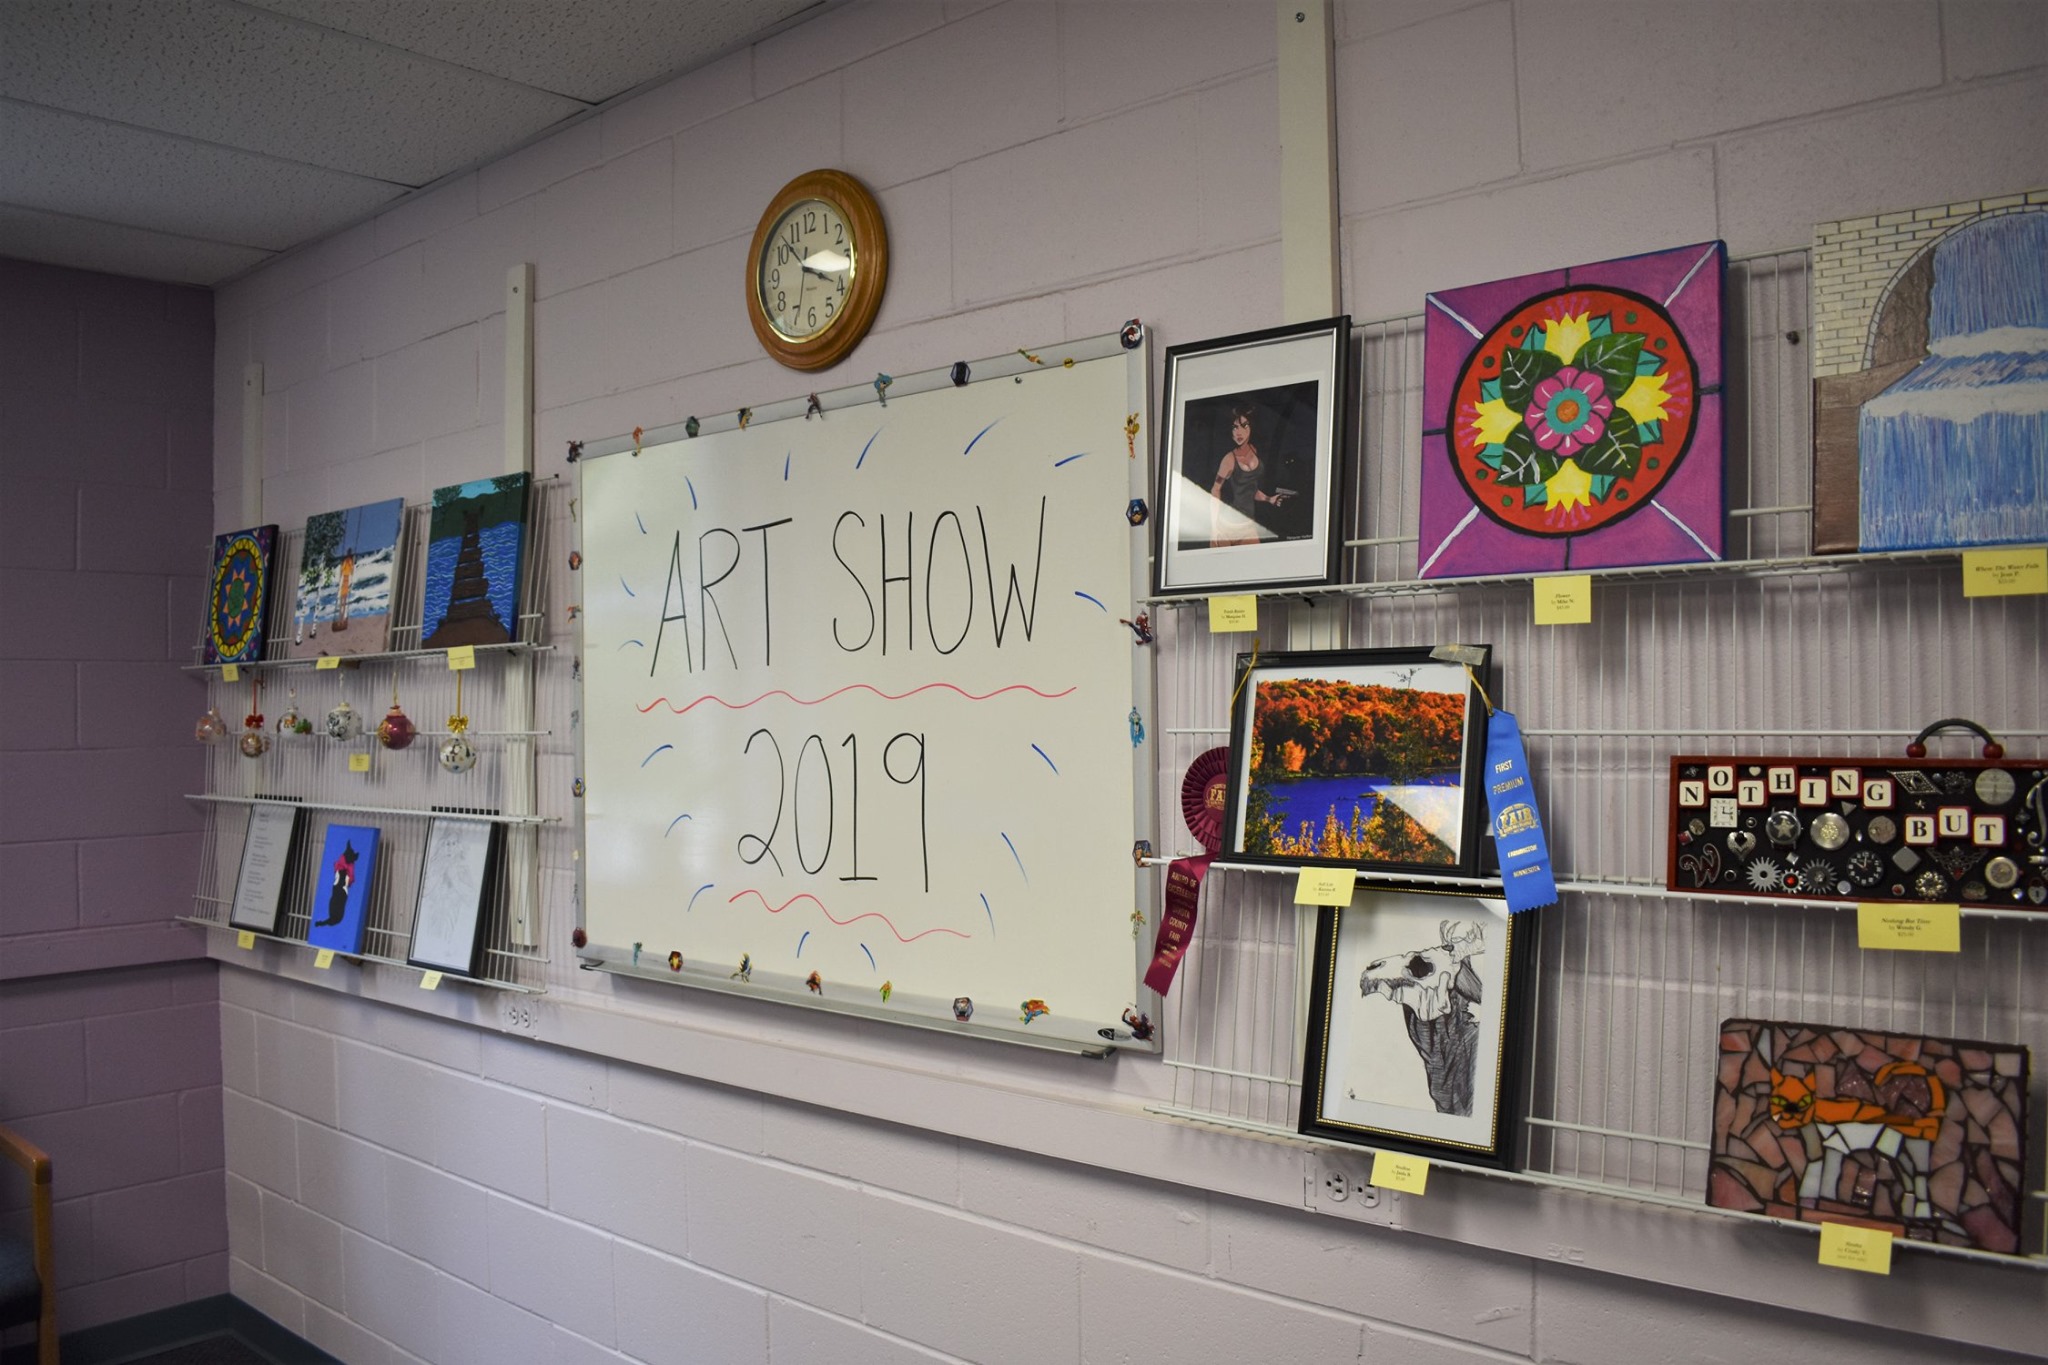 whiteboard with the words "Art show 2019" with art around it